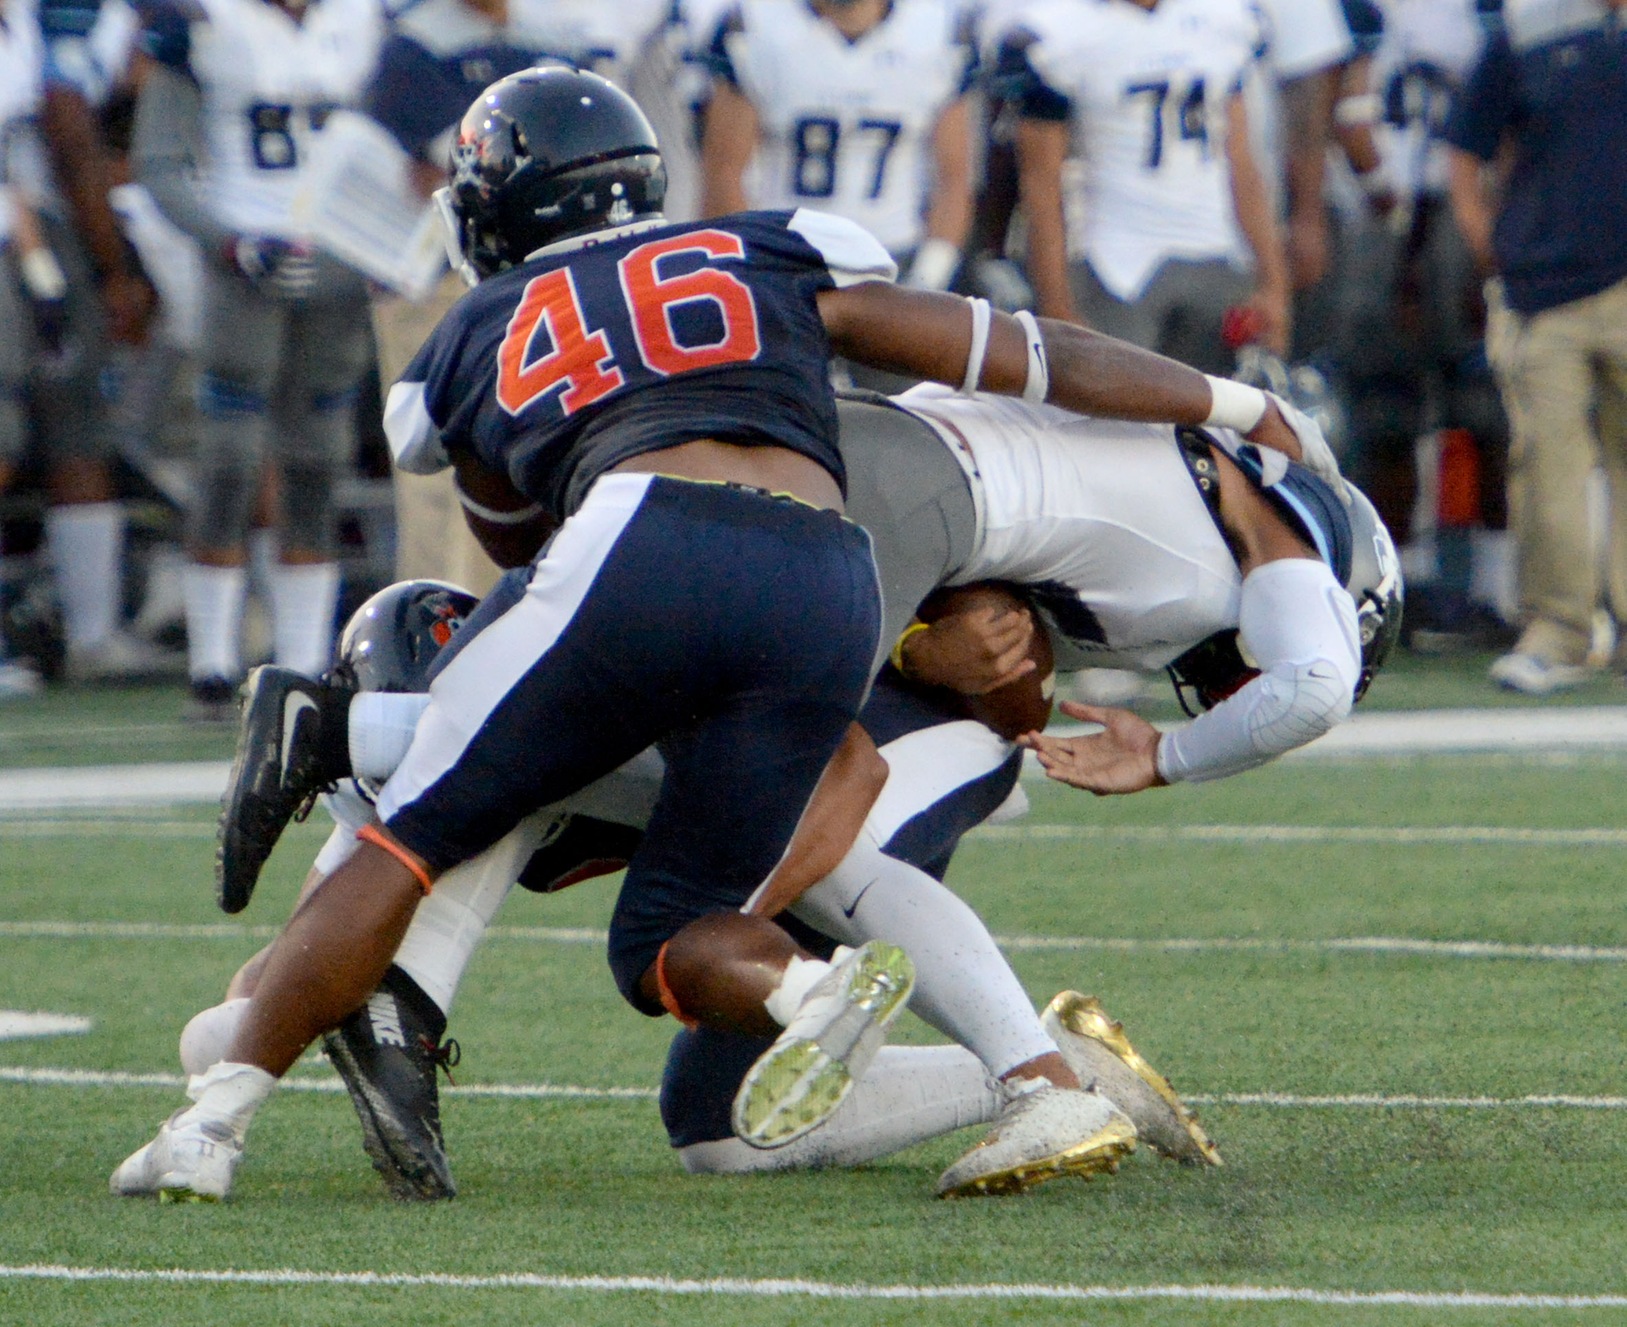 Turnovers costly for Pirates in loss to Bakersfield